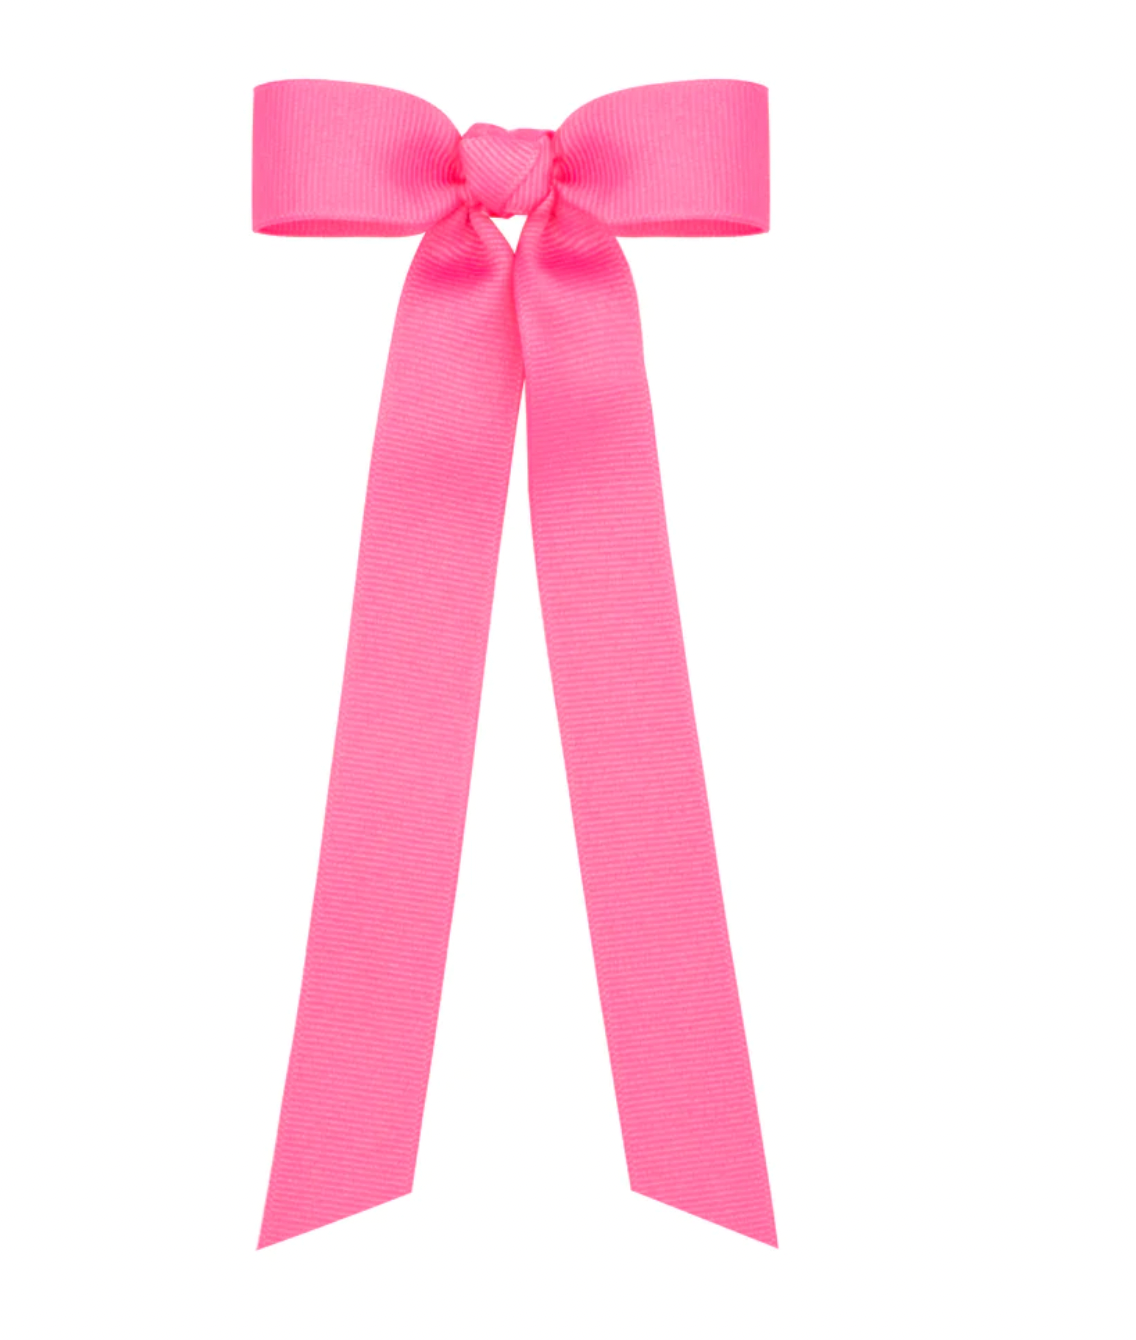 Hot Pink Hair Bowtie with Knot Streamer